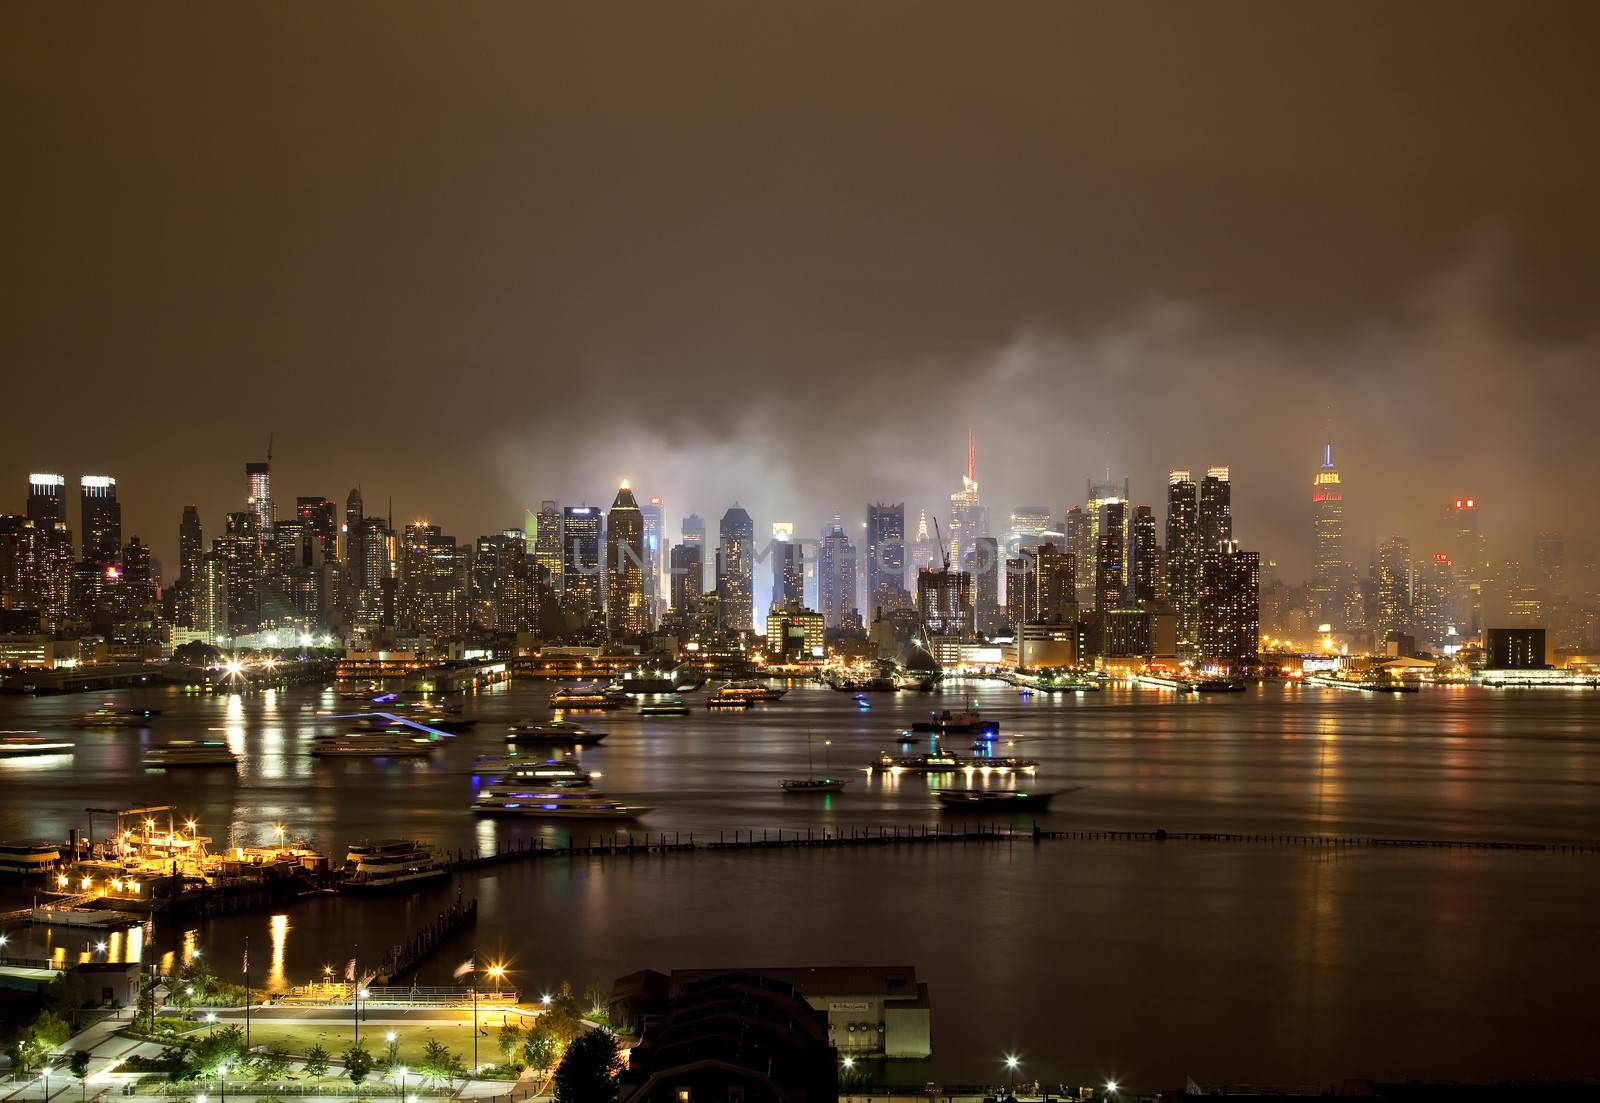 The New York City Skyline right after the July 4th firework